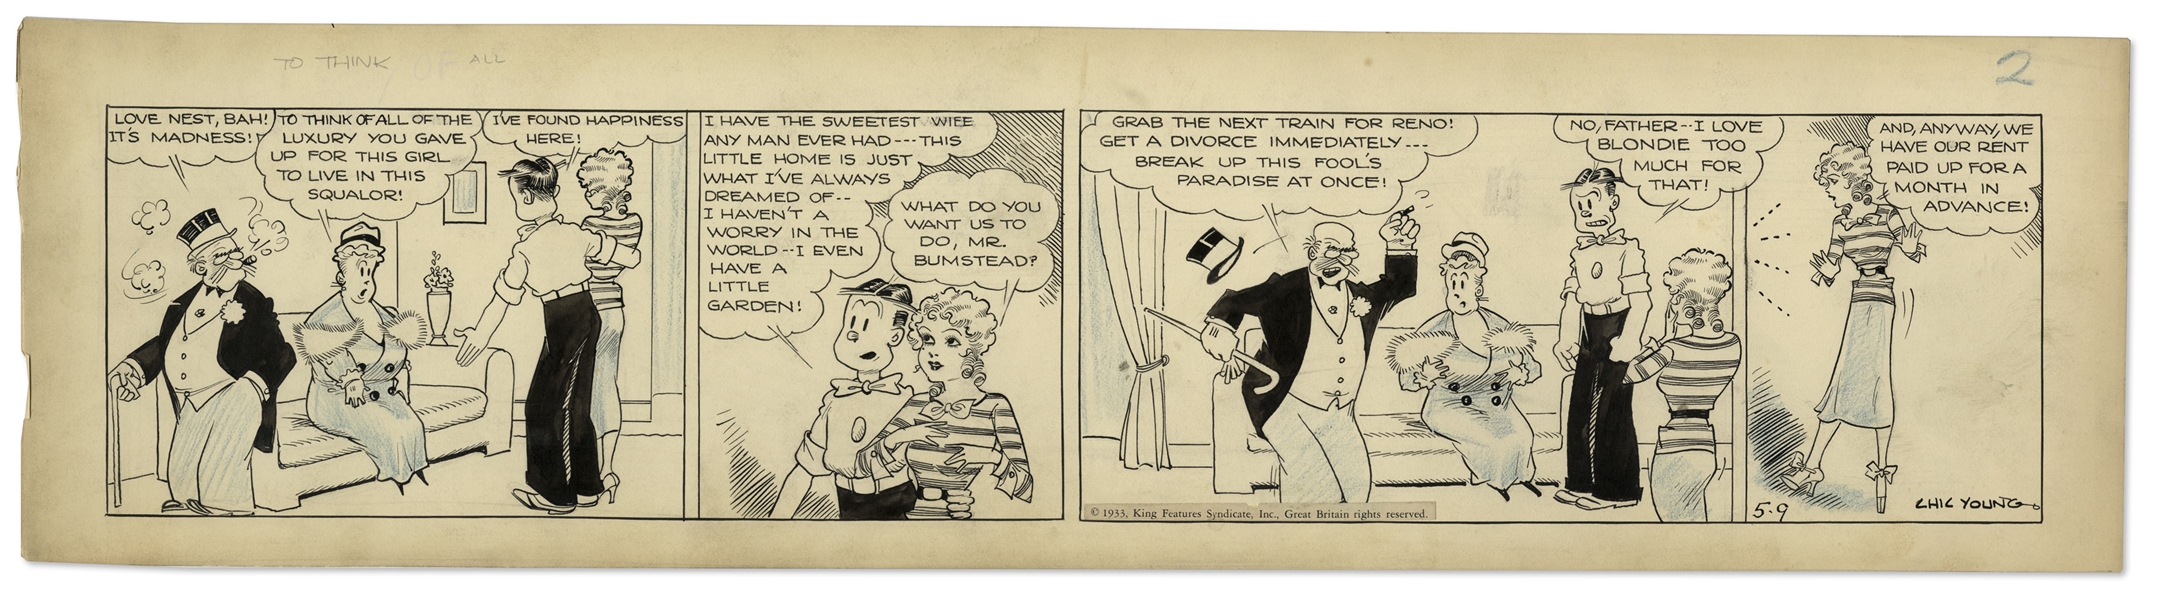 Chic Young Hand-Drawn ''Blondie'' Comic Strip From 1933 Titled ''It Isn't Legal To Break A Lease''